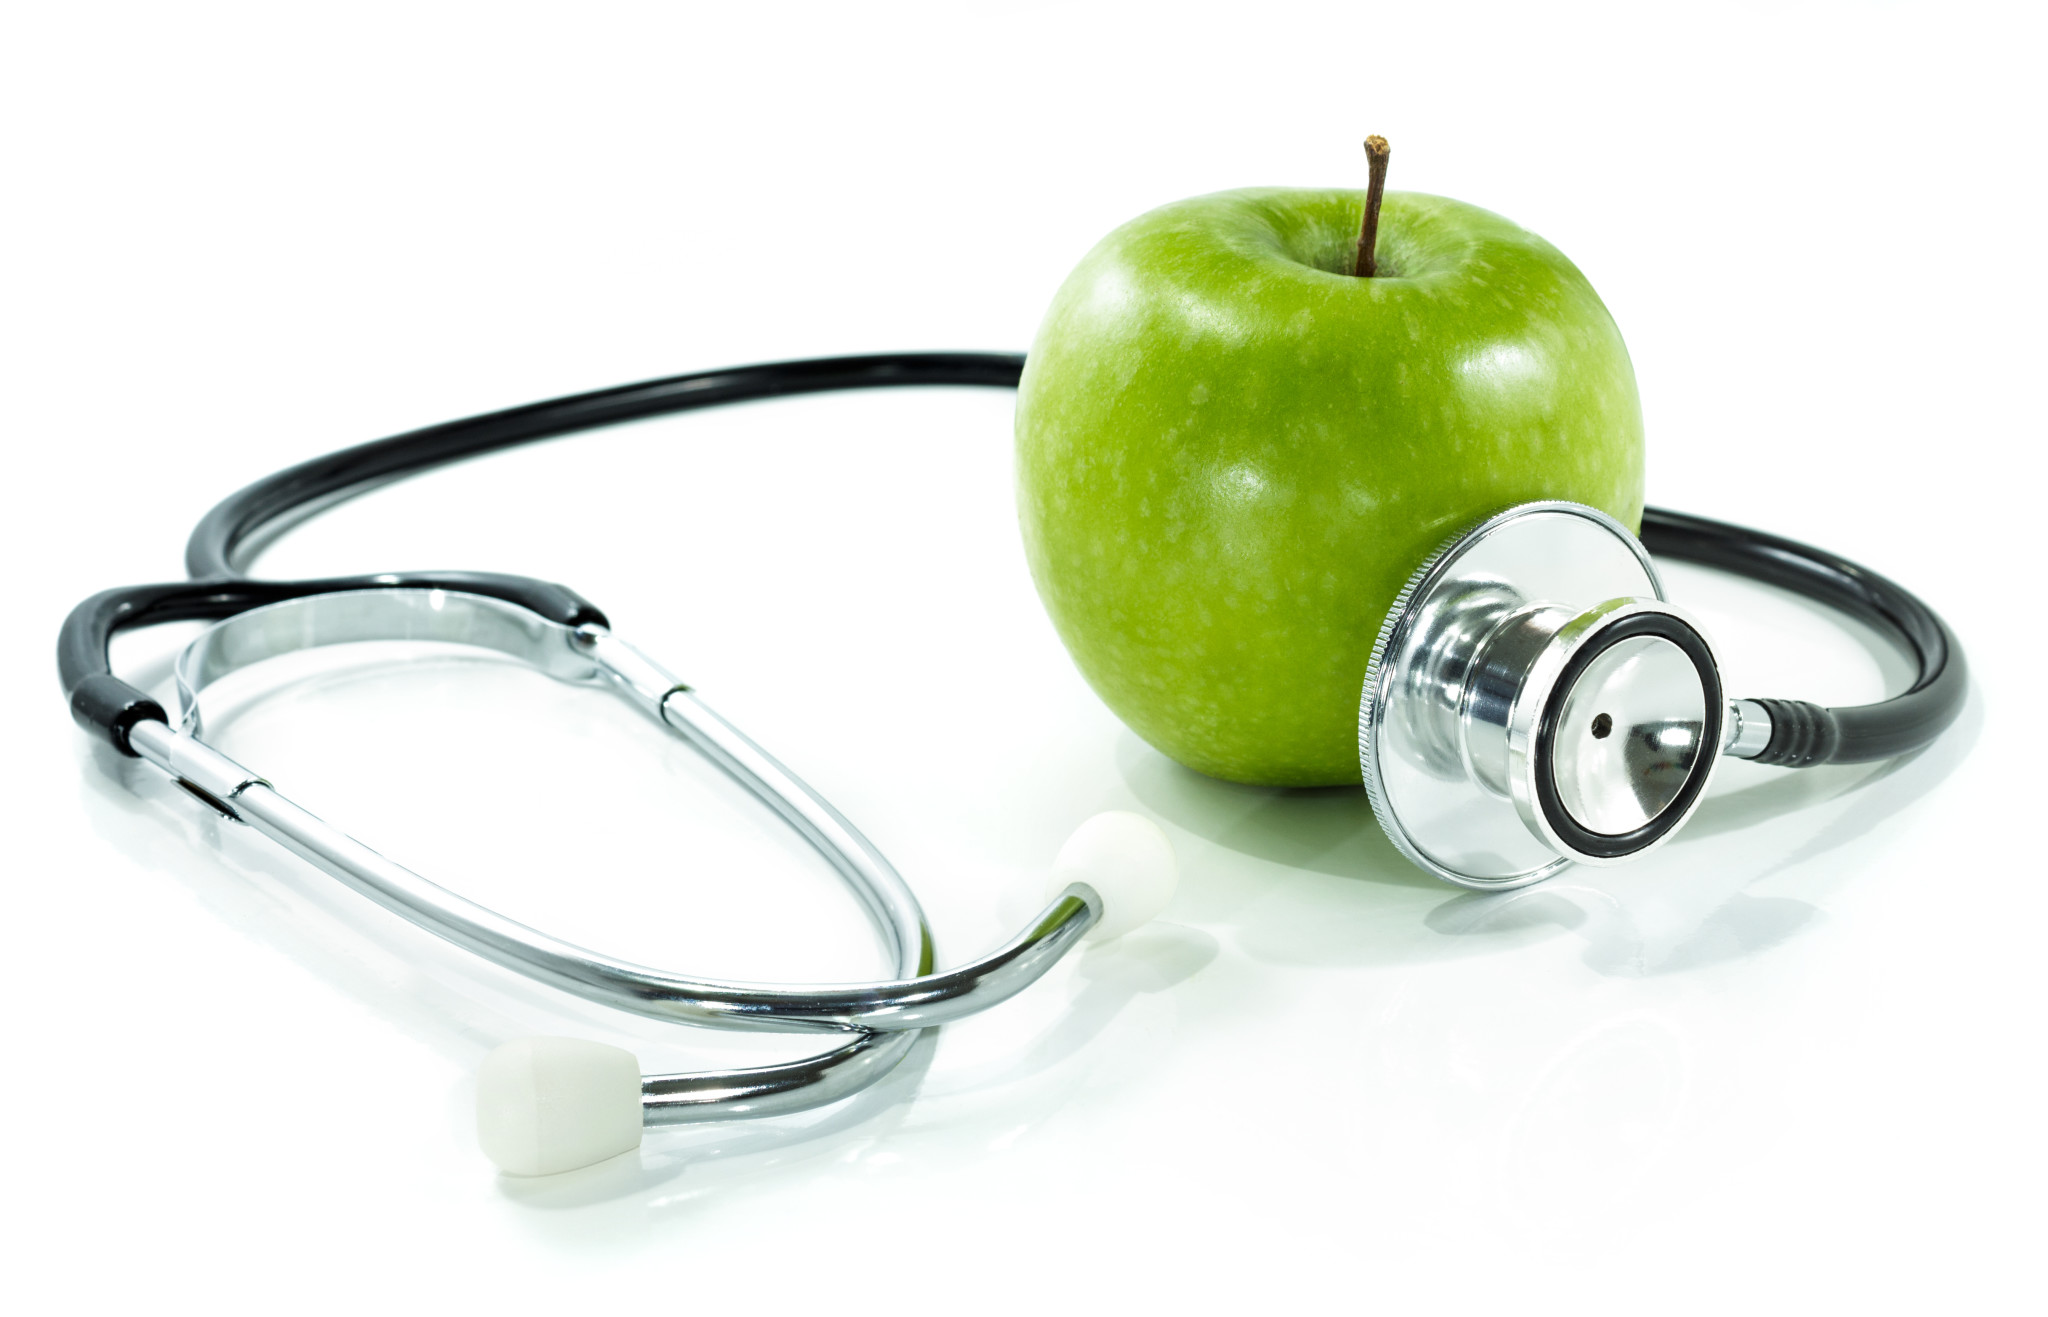 Stethoscope wrapped around an apple